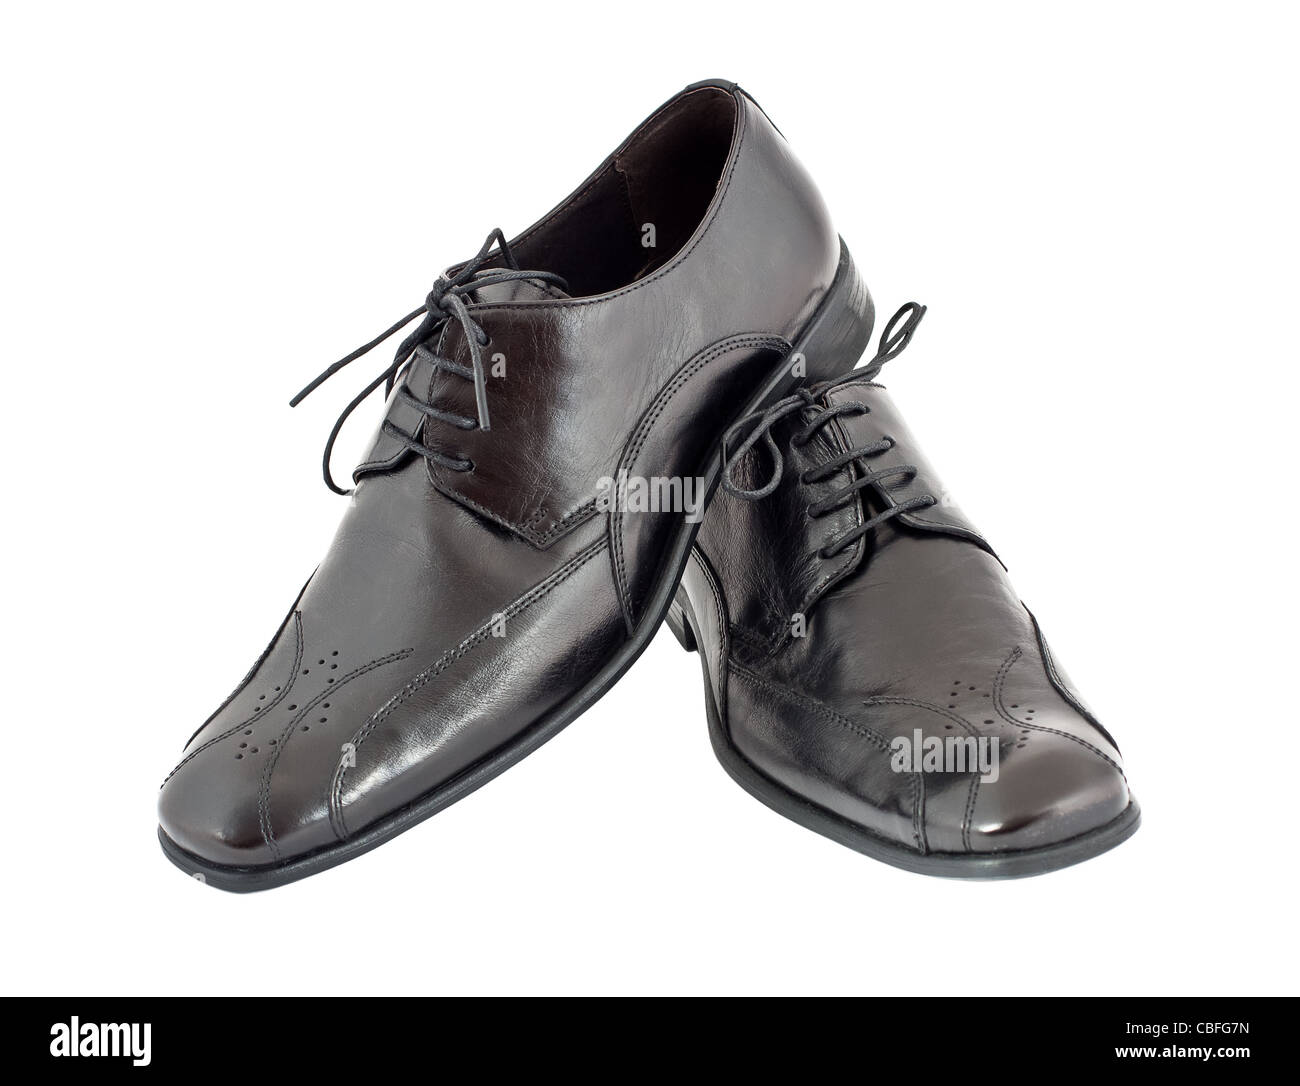 The black men's shoes on white background. Isolated Stock Photo - Alamy